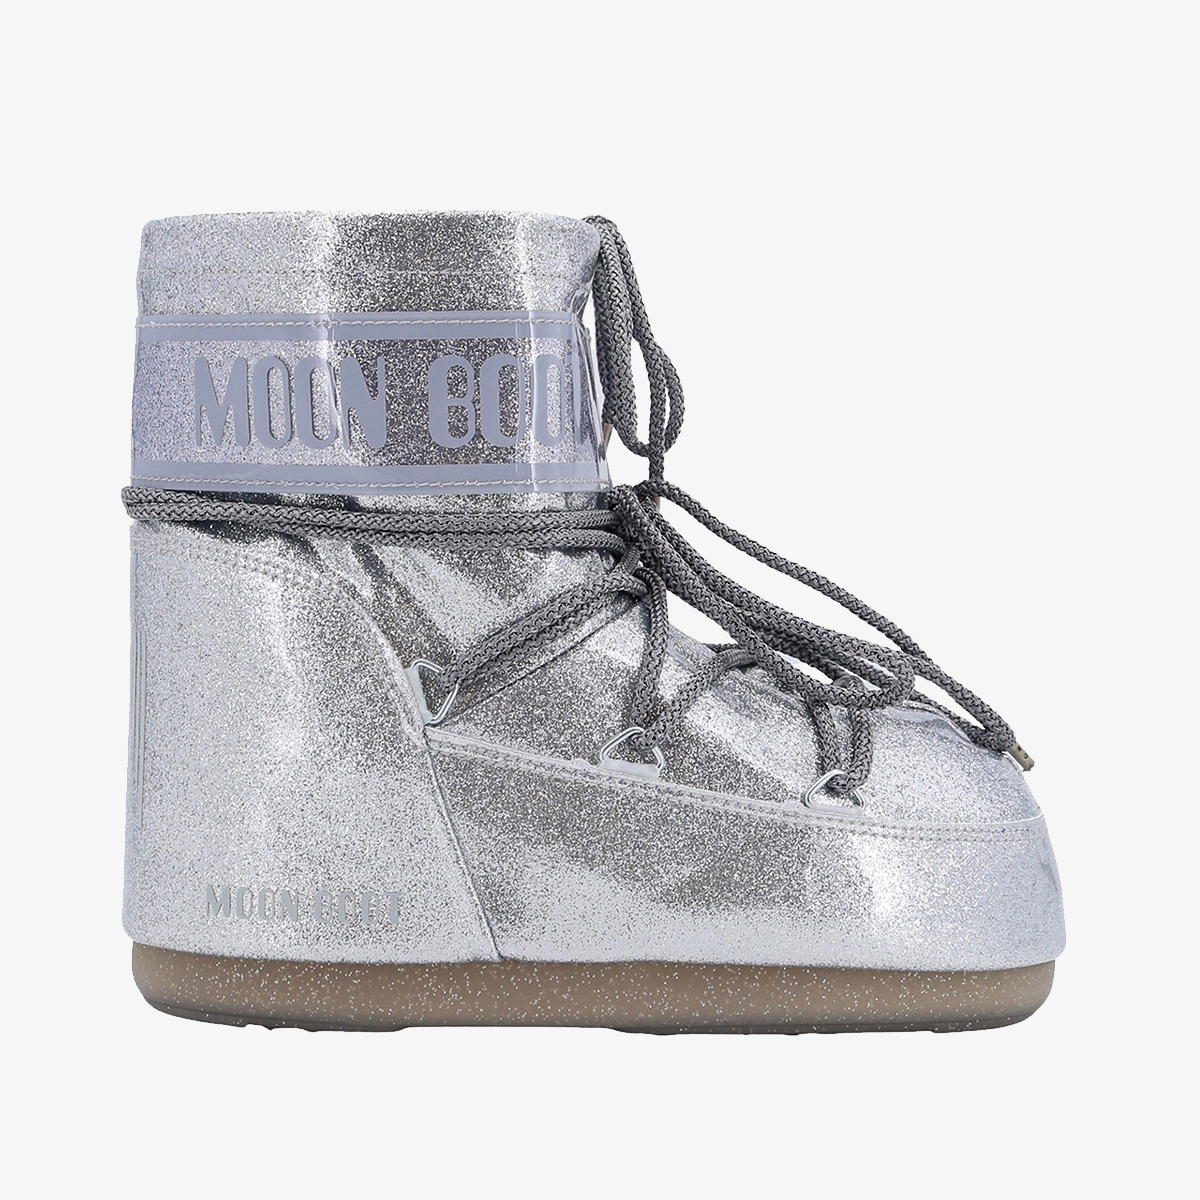 MOON BOOT Čizme MB ICON LOW GLITTER SILVER 